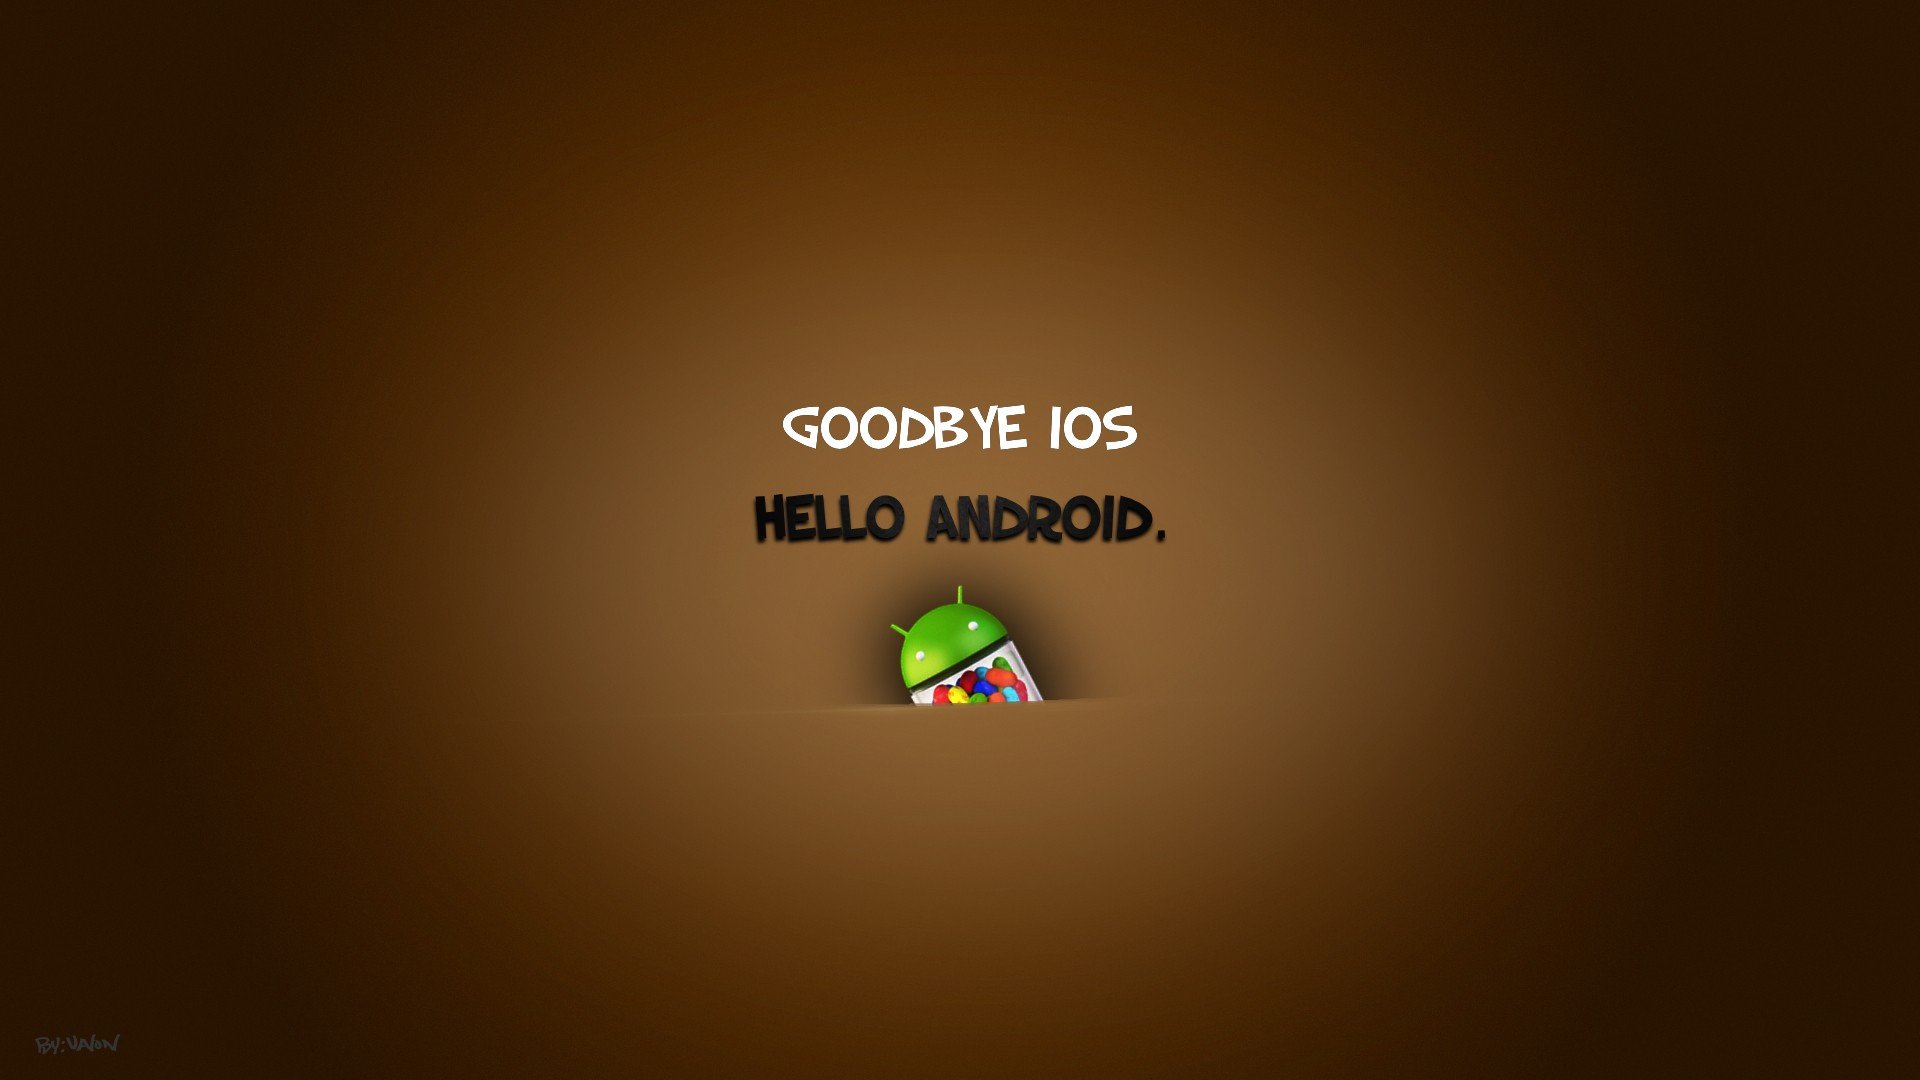 android, Google, Textures, Versus, Switches, Simple, Background, Blurred, Nexus, Ios, 6, Jelly, Bea Wallpaper